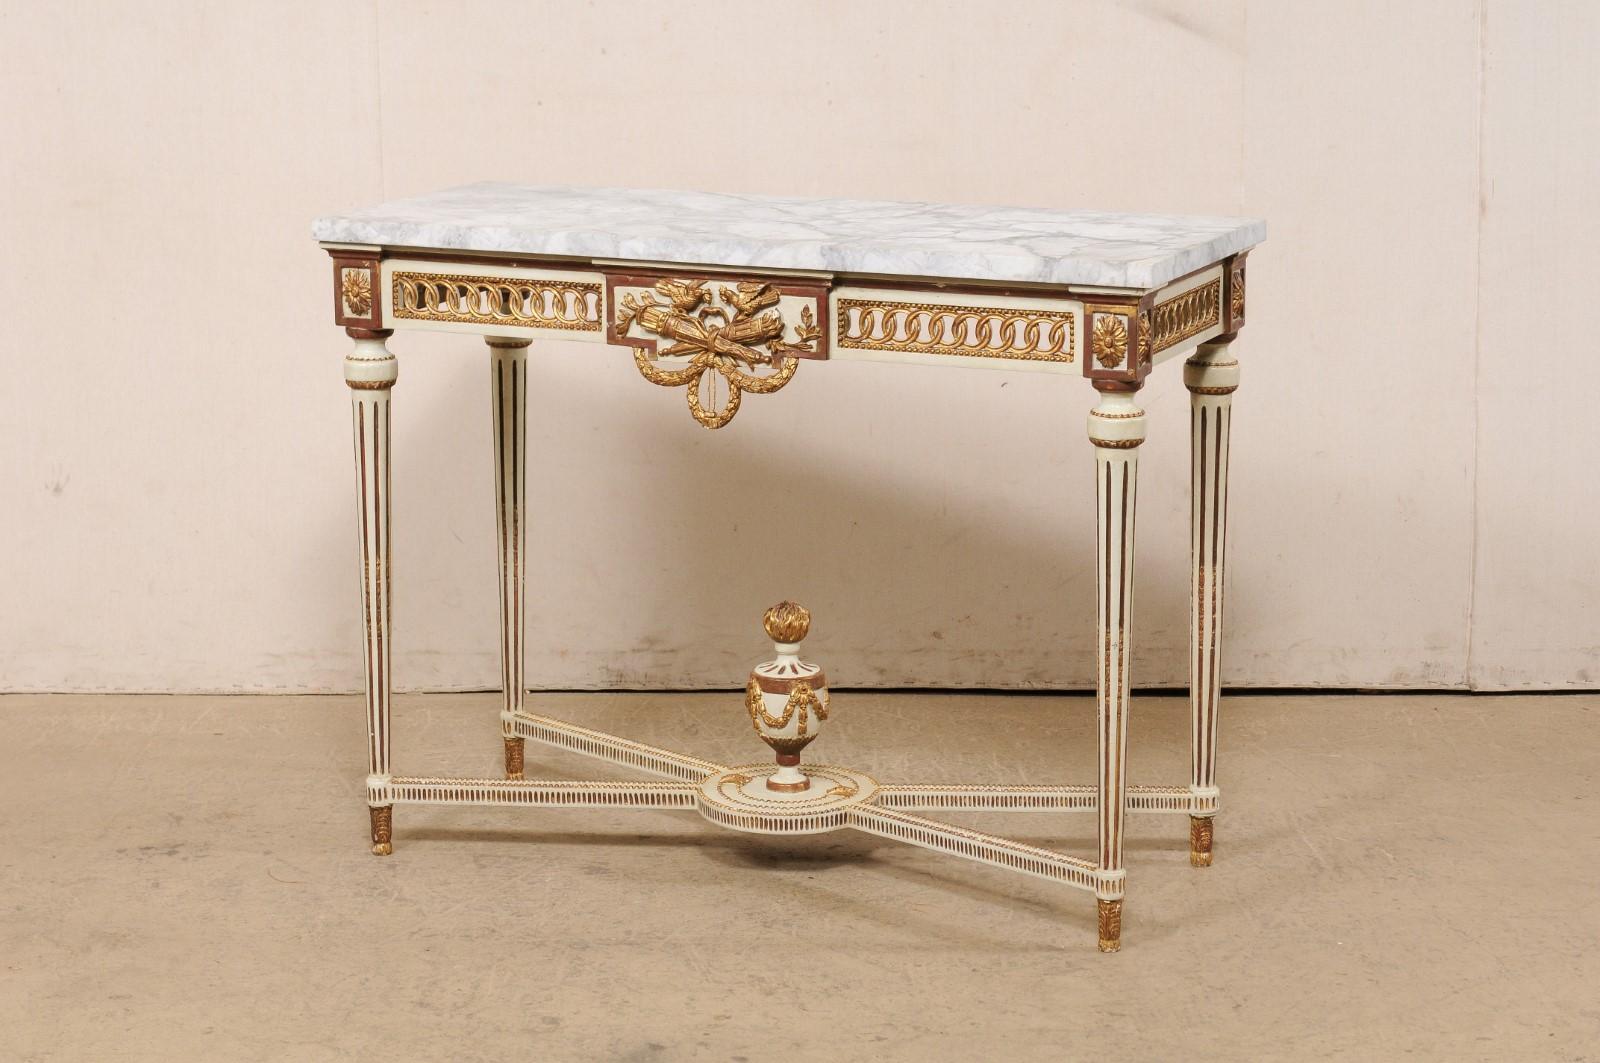 Italian Marble Top Console w/Pierce-Carved Apron & Large Urn Finial at Underside For Sale 6